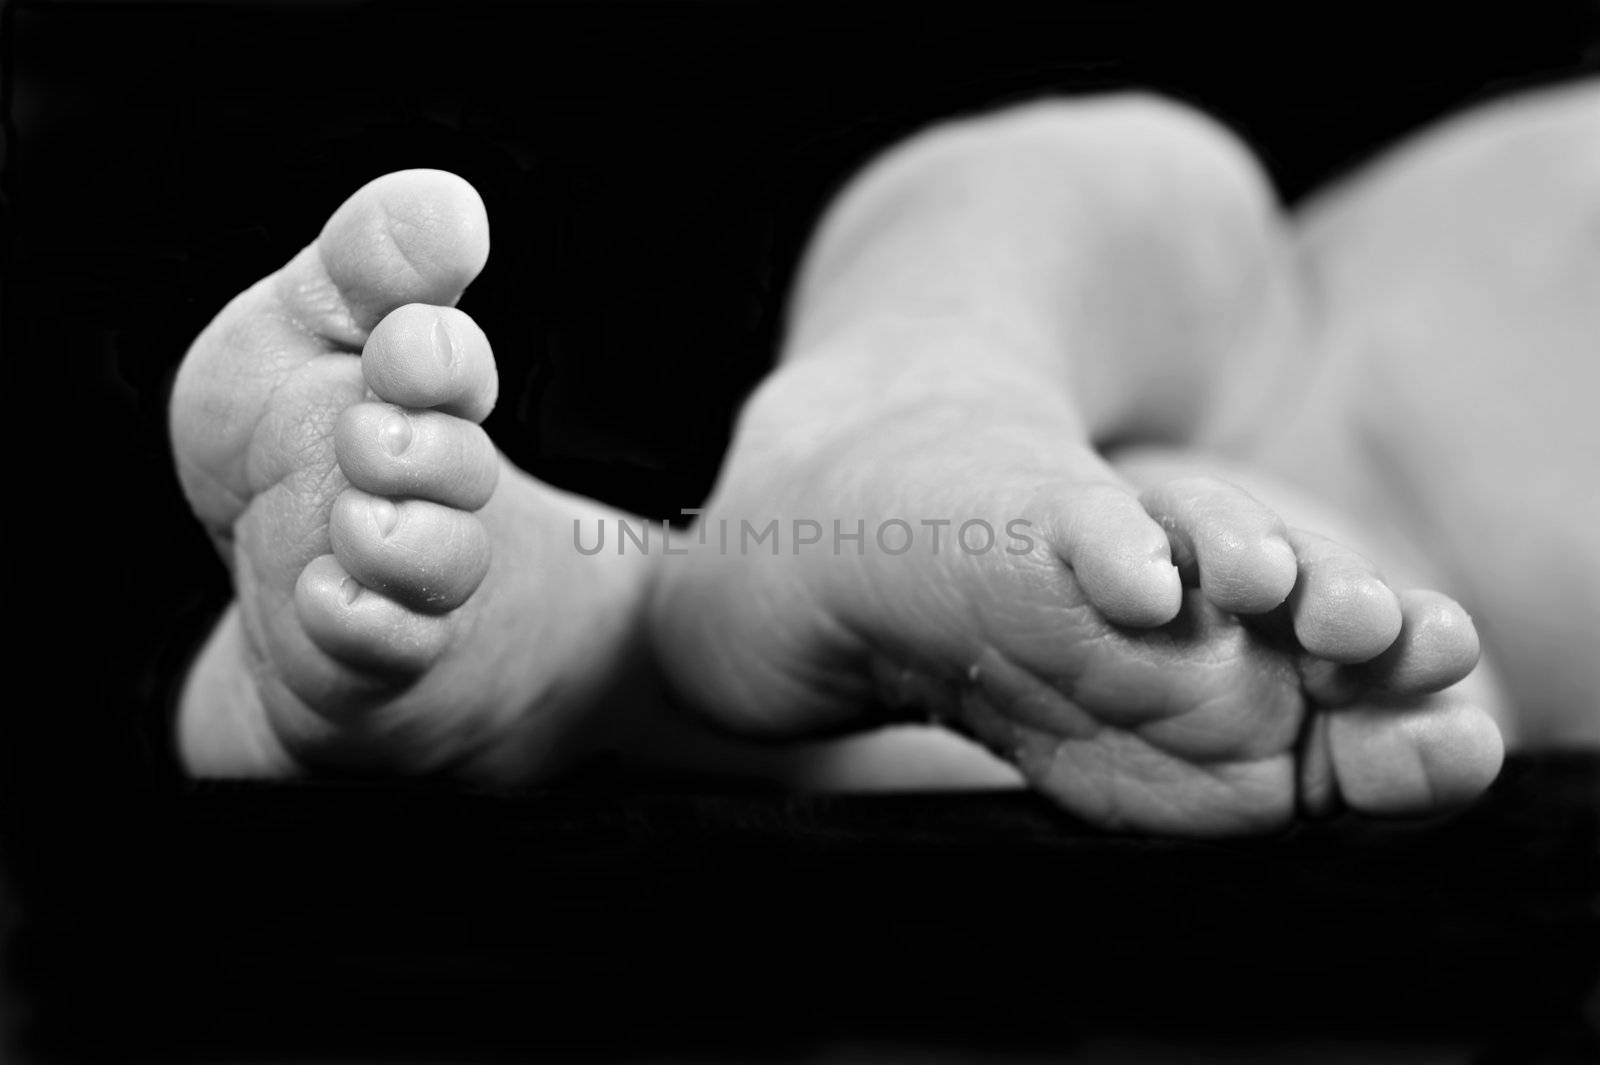 The bare feet of a new born baby by tish1